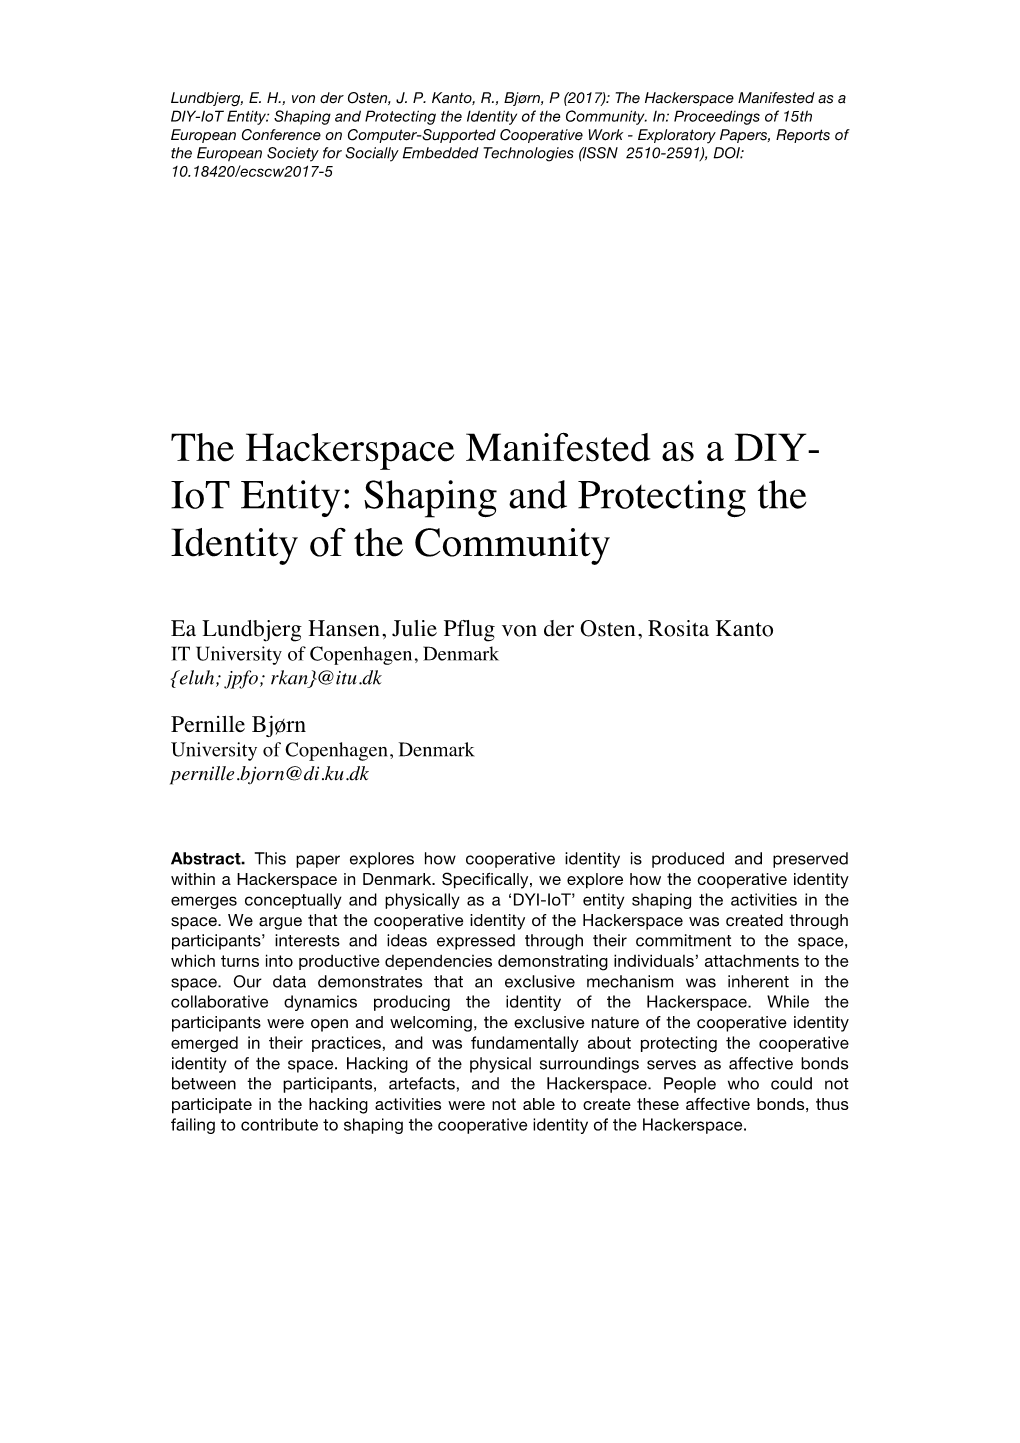 The Hackerspace Manifested As a DIY-Iot Entity: Shaping and Protecting the Identity of the Community